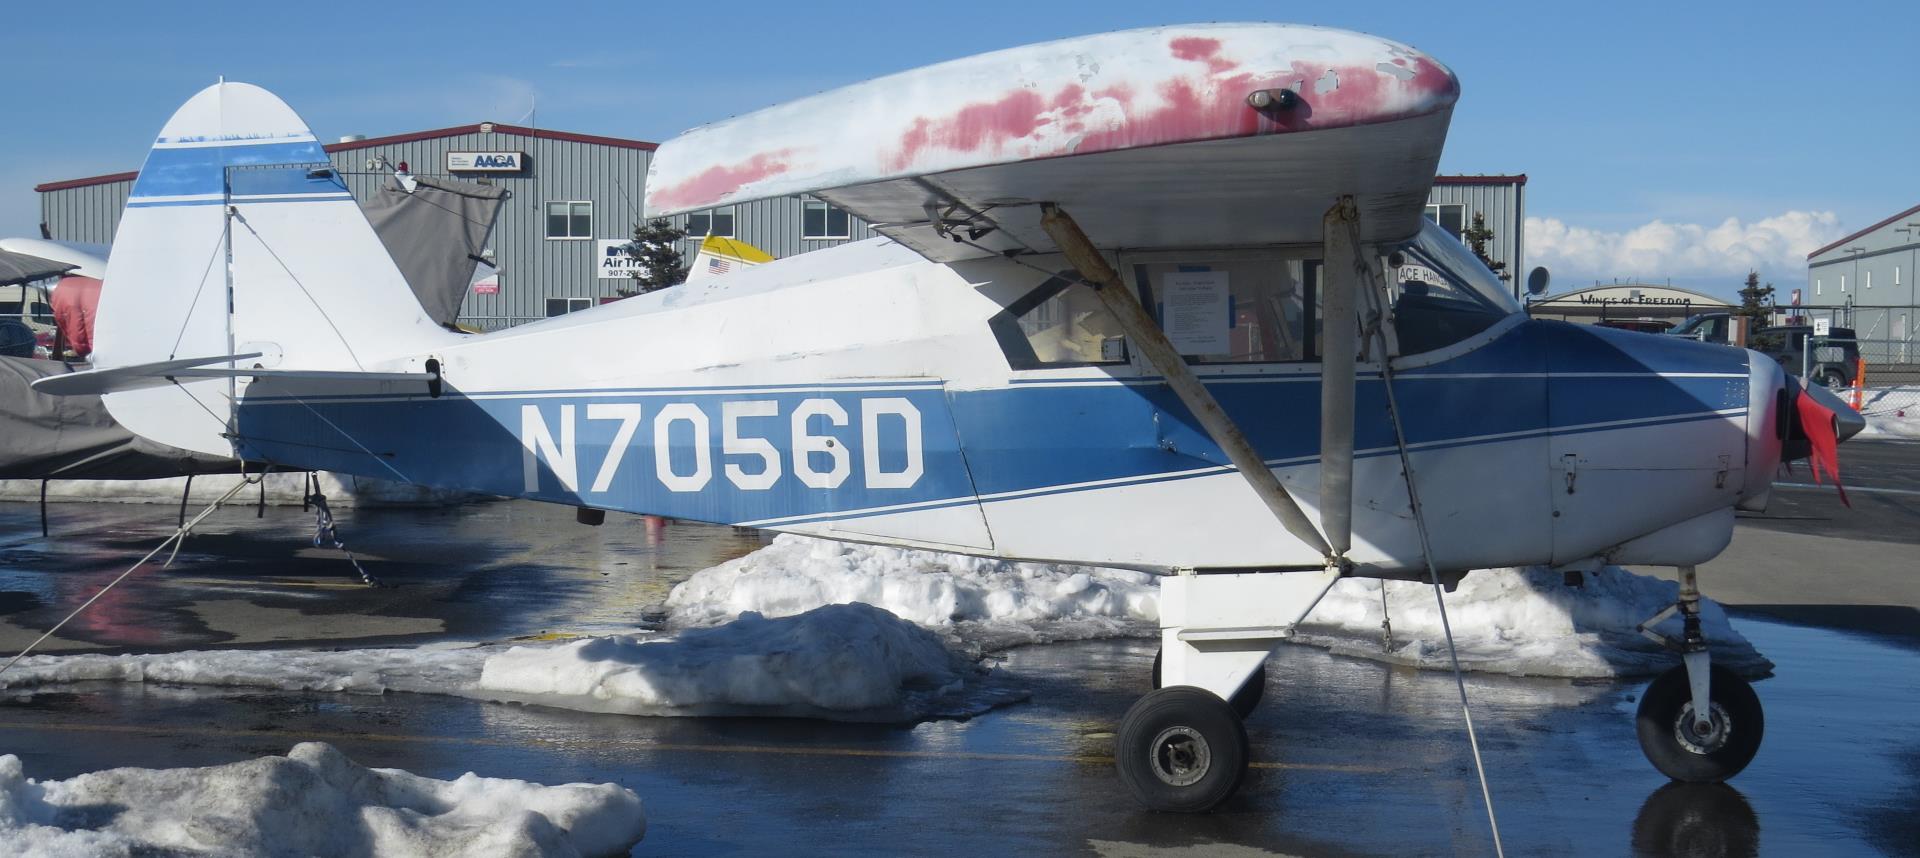 Piper Tri-Pacer Project For Sale: “Great Potential, Engine Fires Right Up”